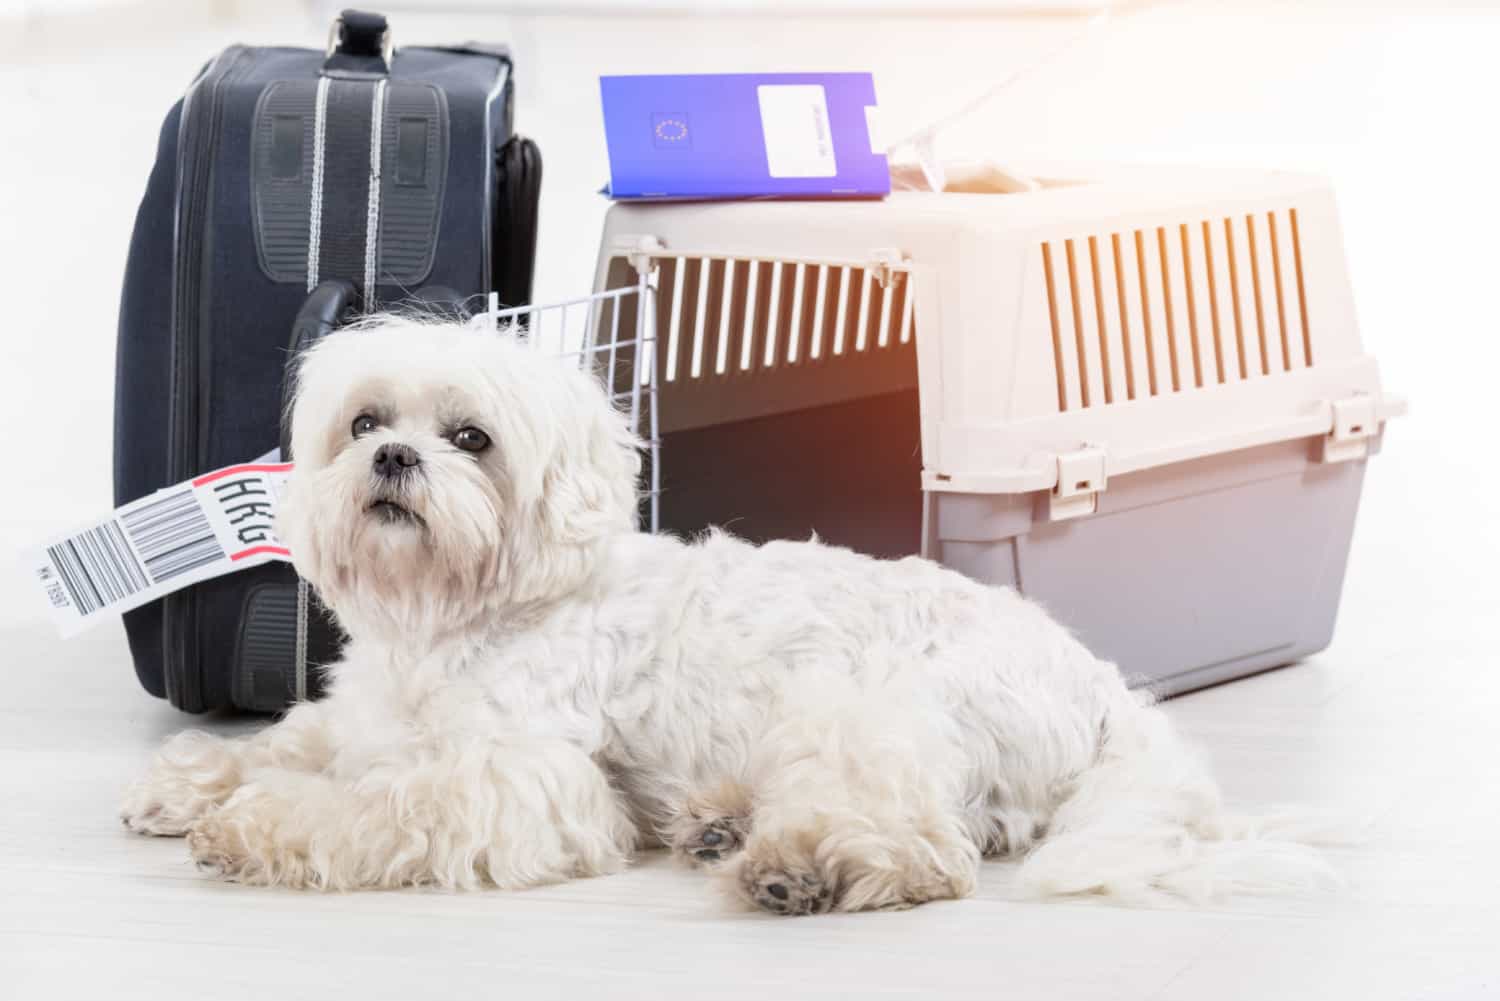 Fluffy white dog waiting at the airport with airline cargo pet carrier and luggage in the background